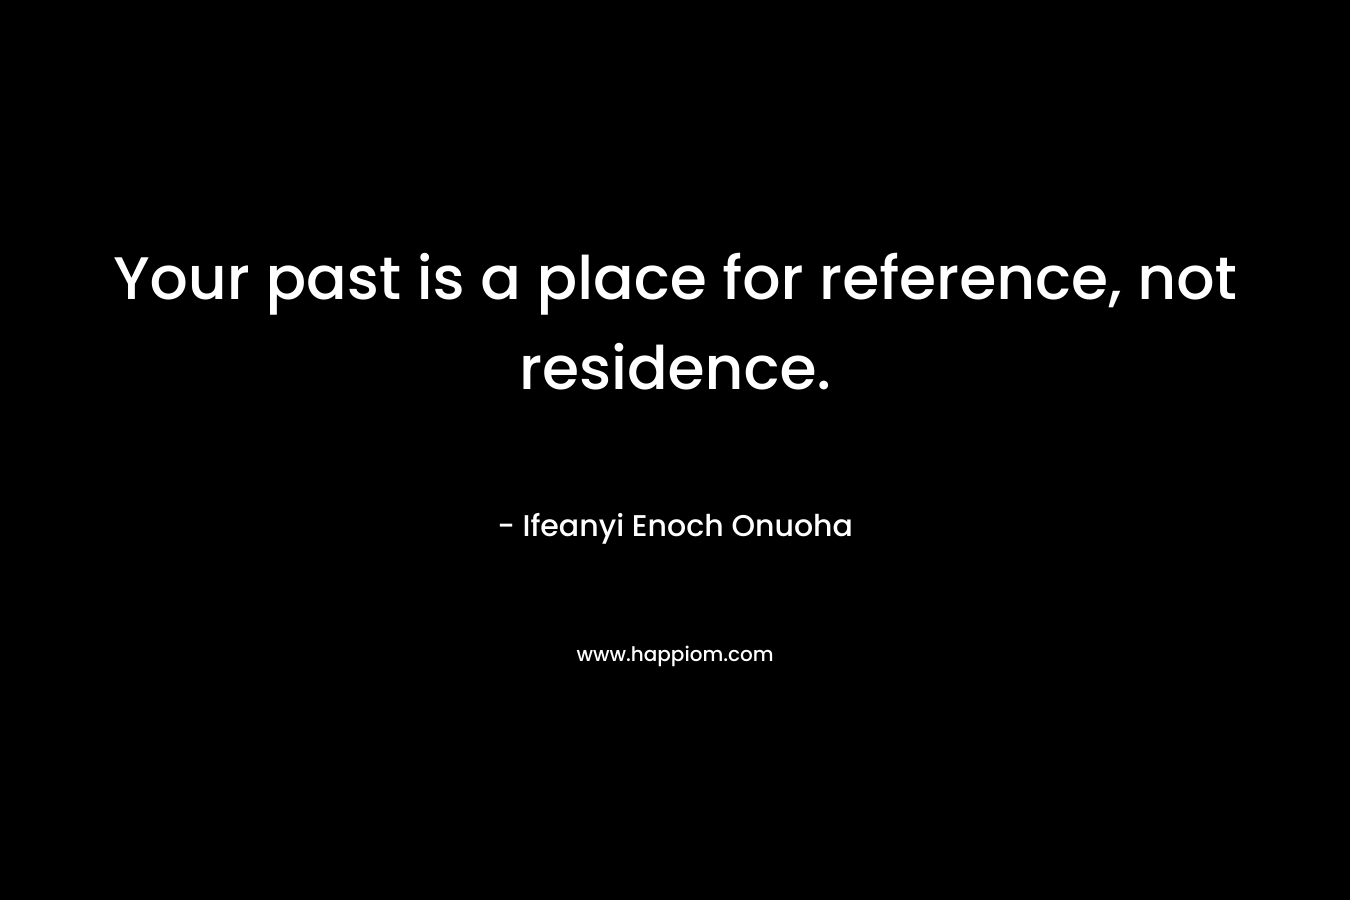 Your past is a place for reference, not residence.